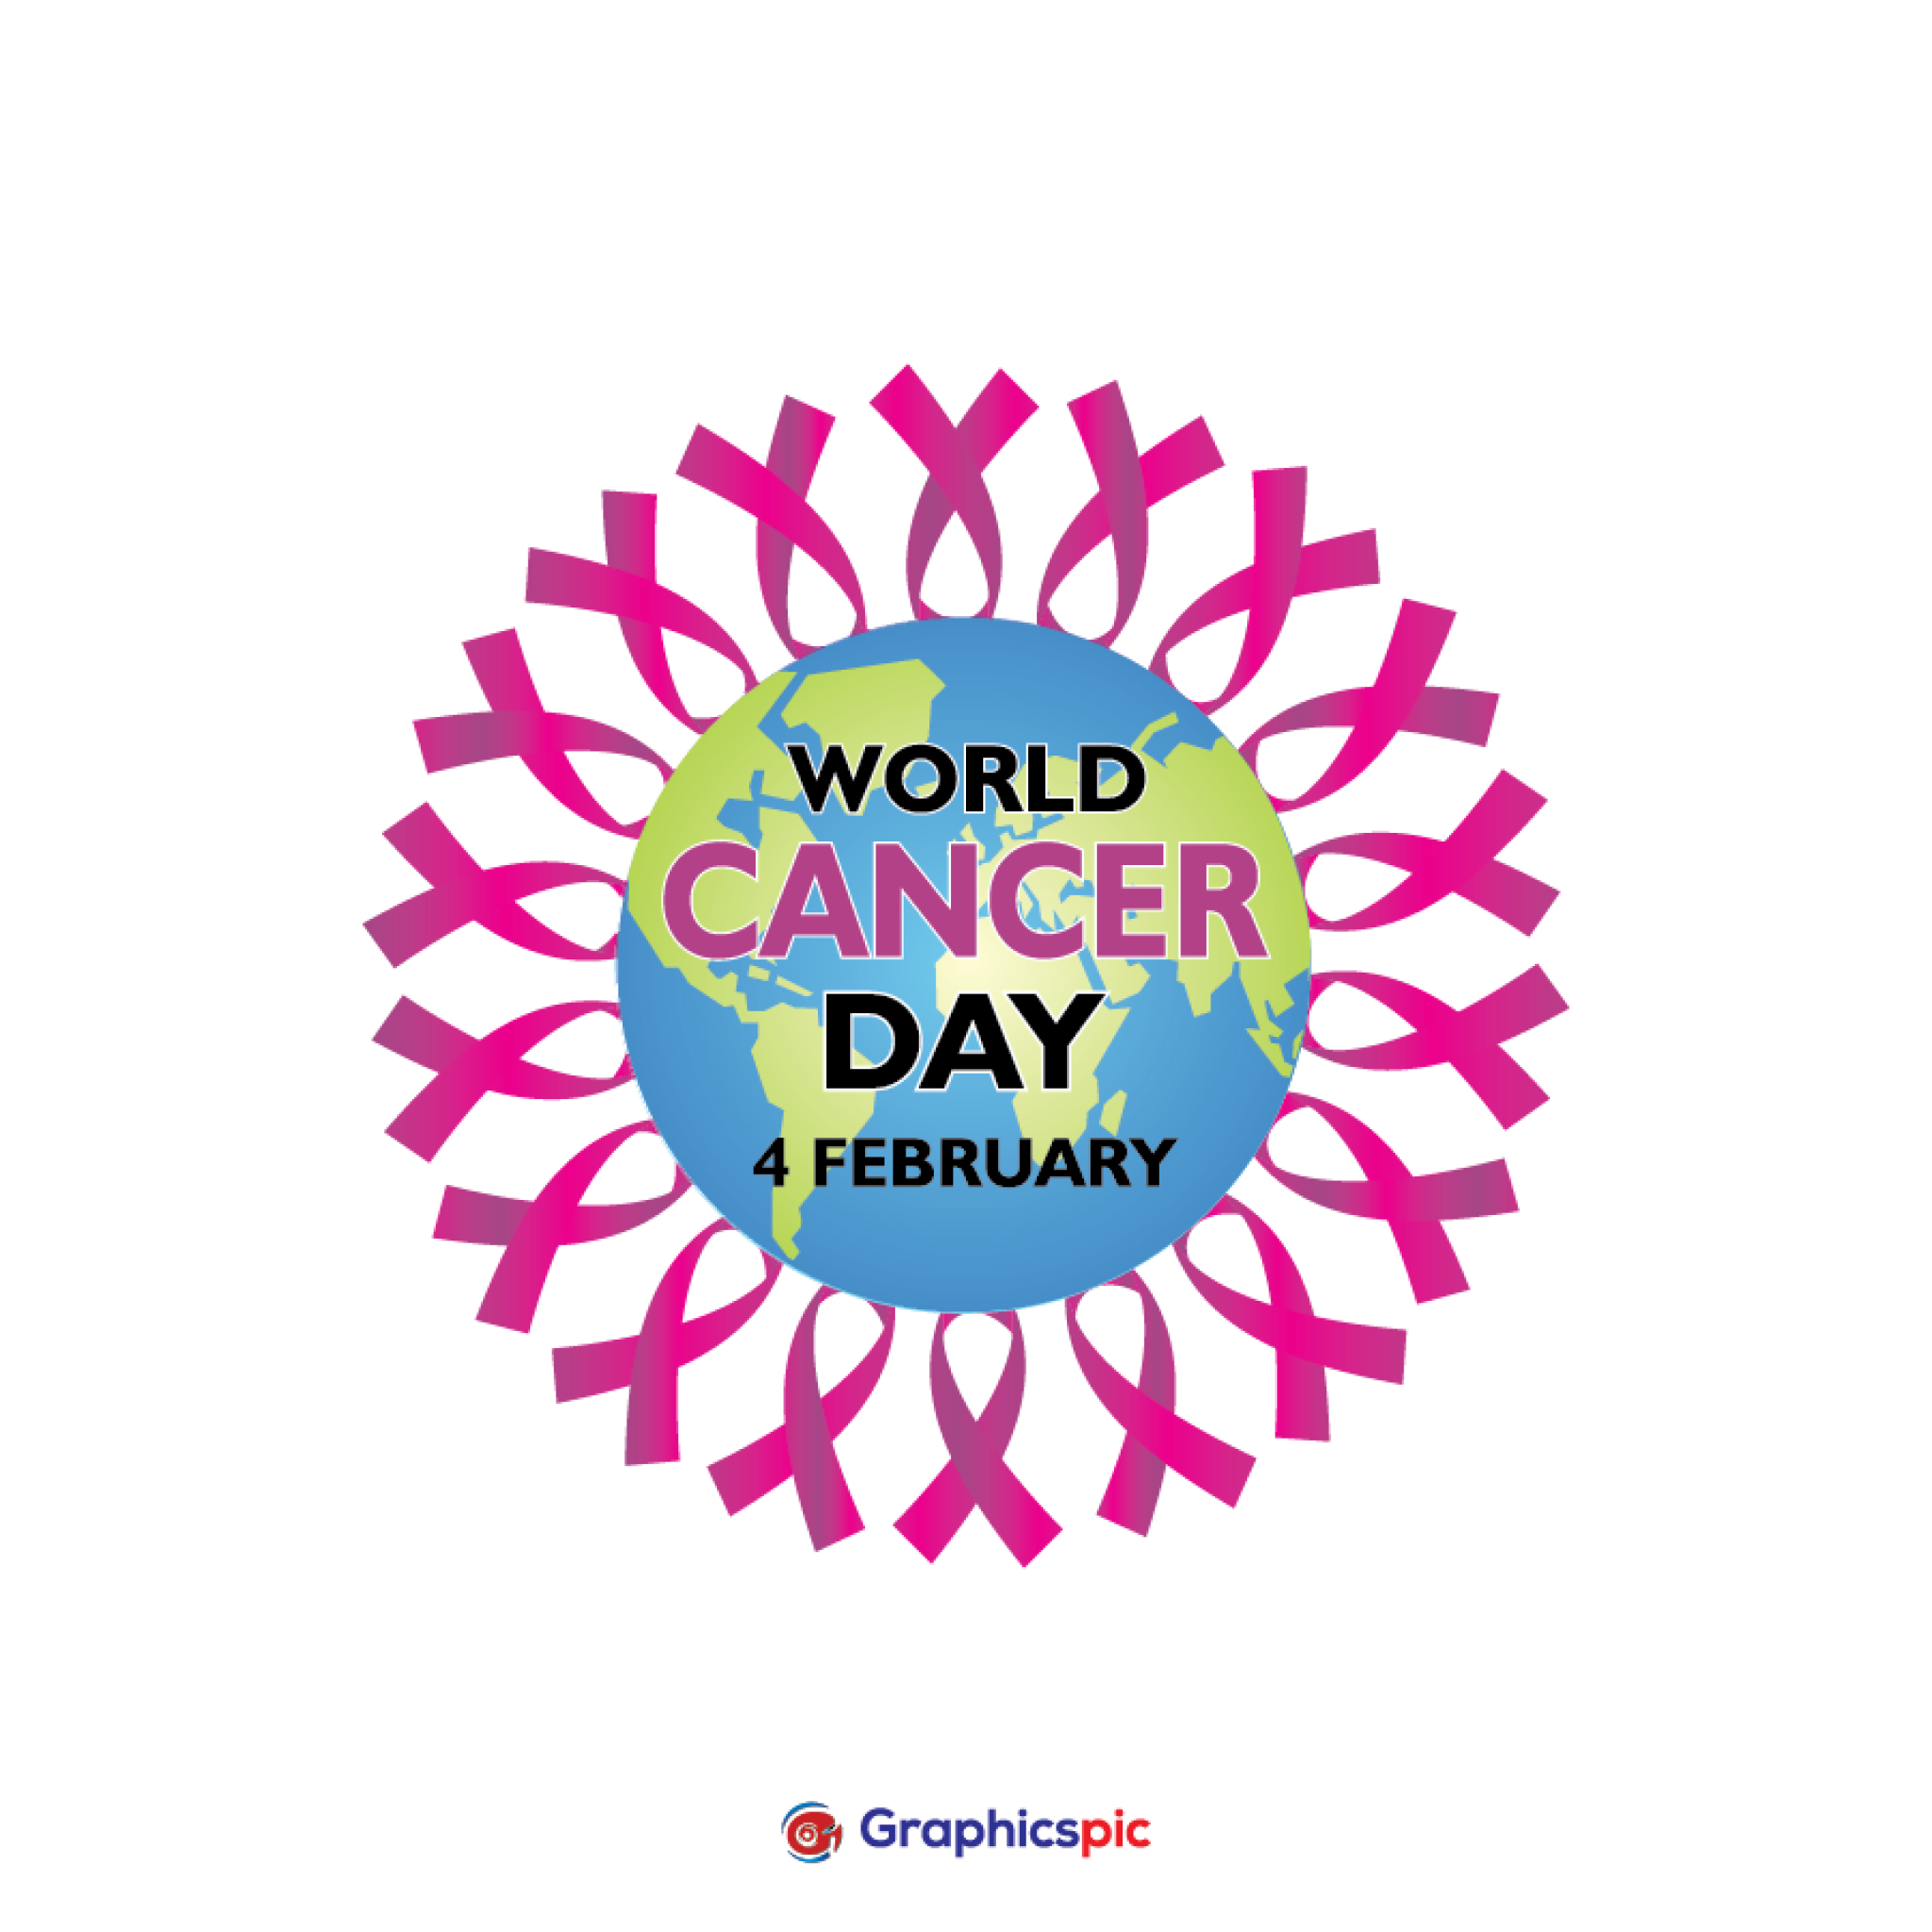 World cancer day design with awareness ribbons illustration photo